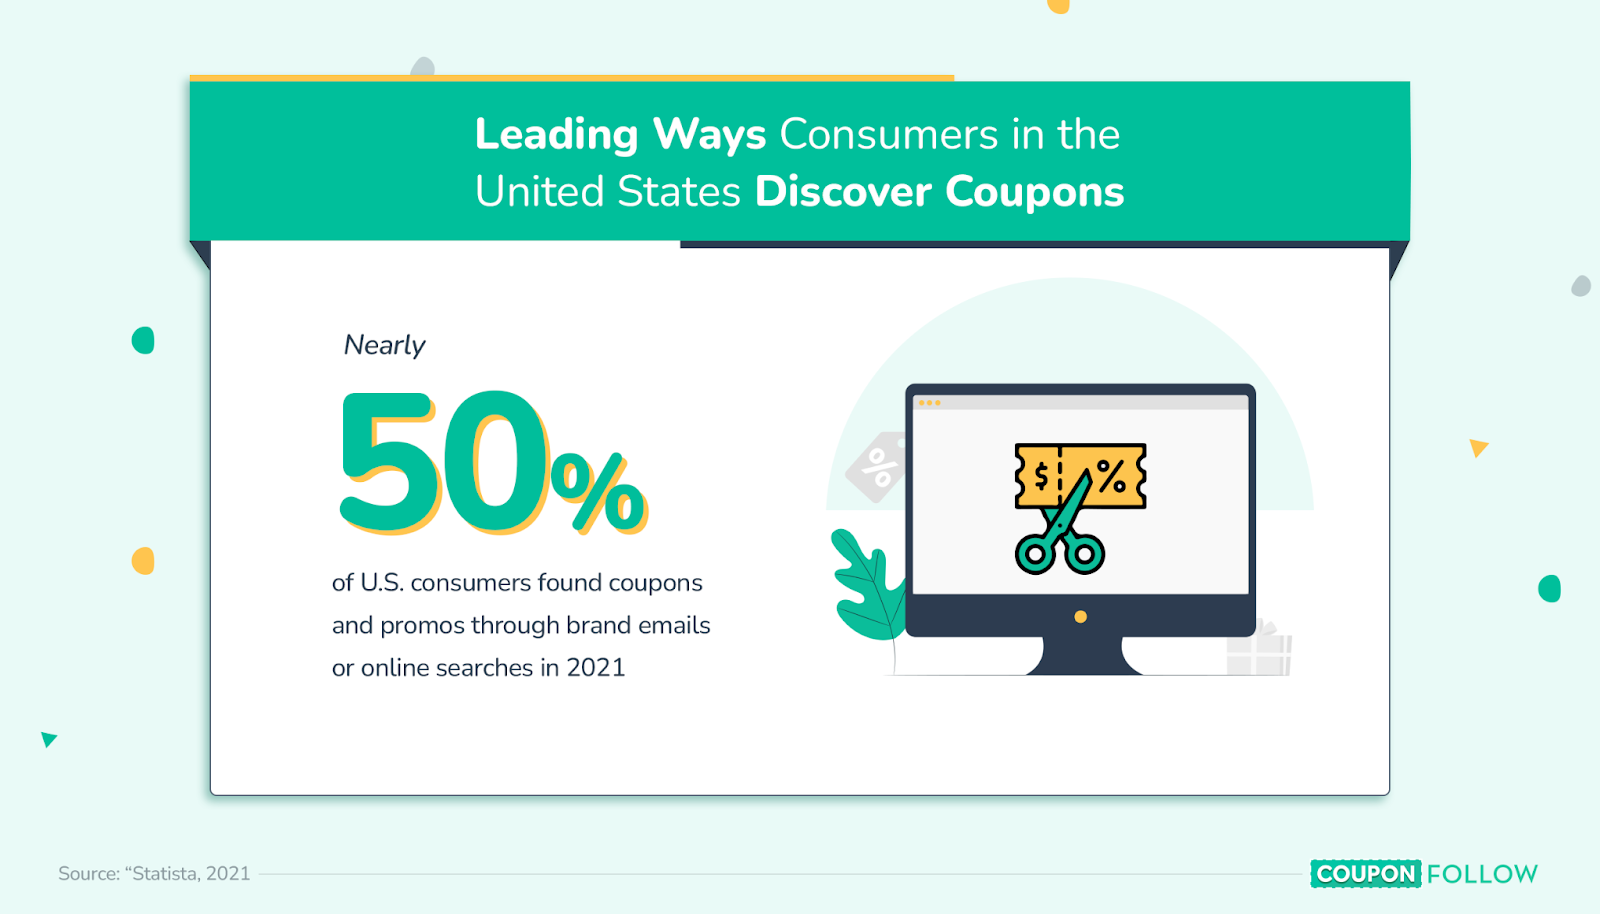 US consumer’s most utilized methods for discovering coupons and promos